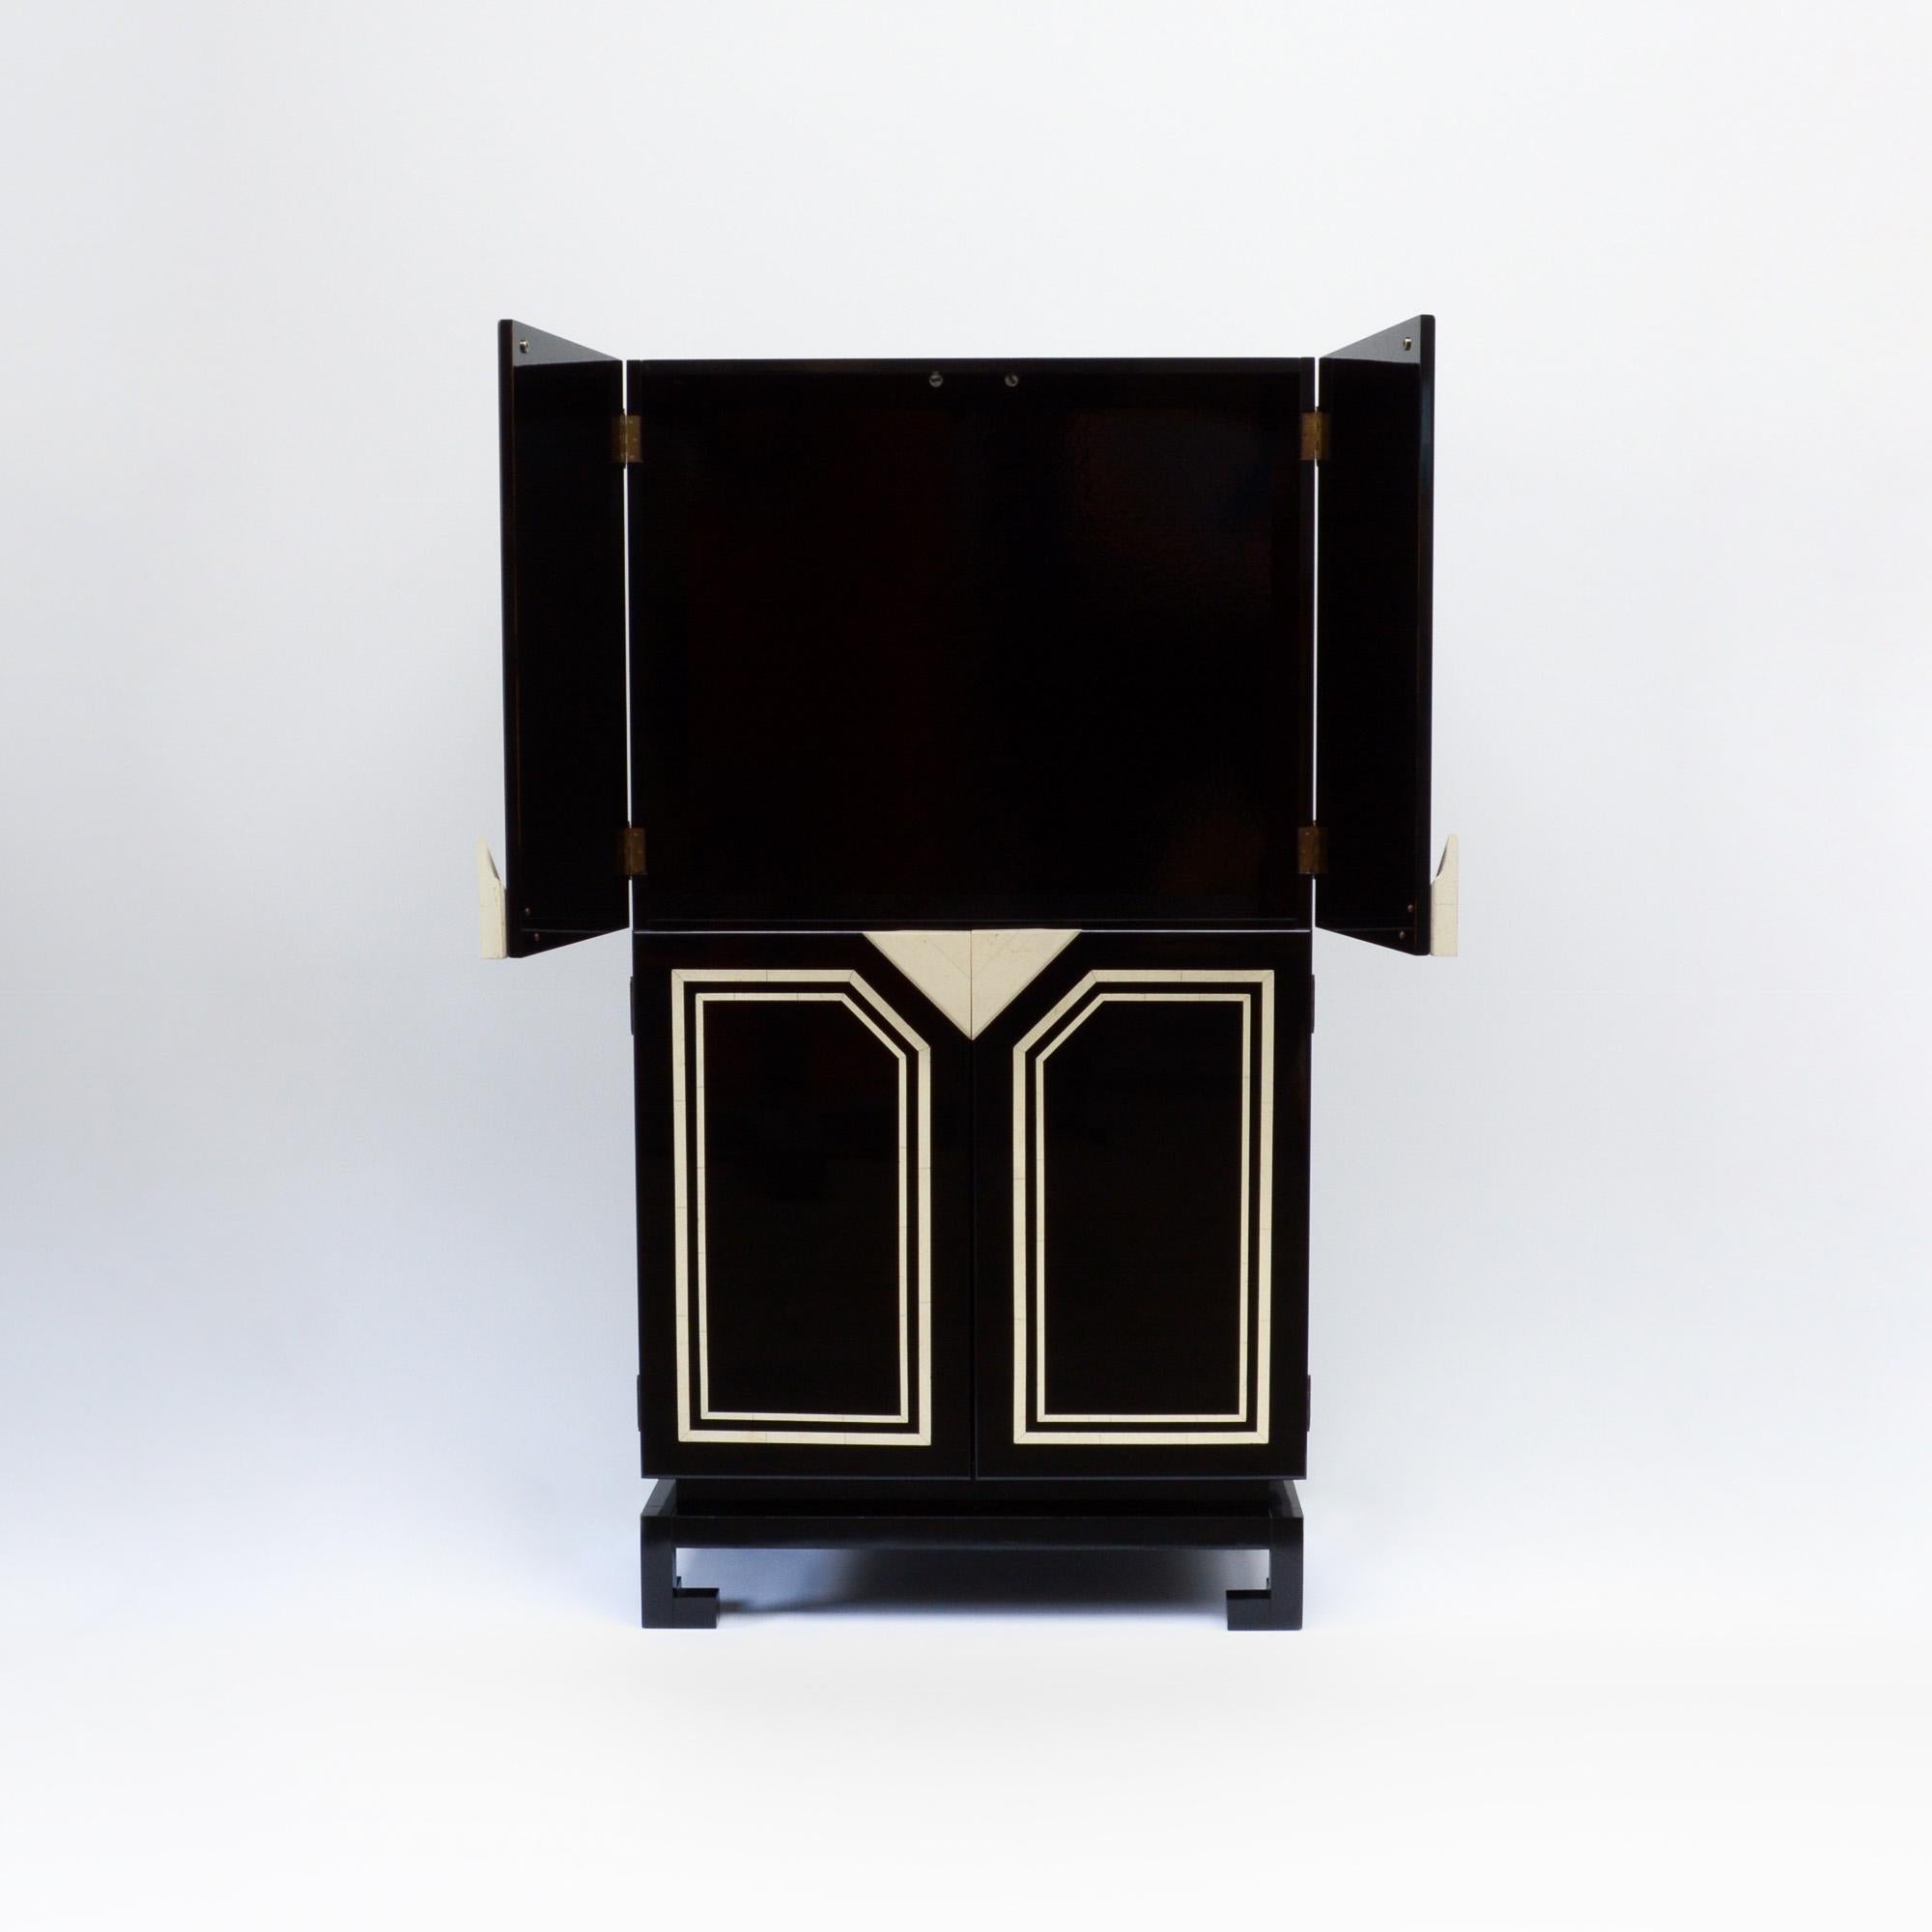 This black and white lacquered cabinet can be dated in the late 1960s-early 1970s.
We’ve found similar cabinets from the Paco Rabanne collection, but this one is without the Paco Rabanne logo on the handles.
This high quality four-door cabinet is